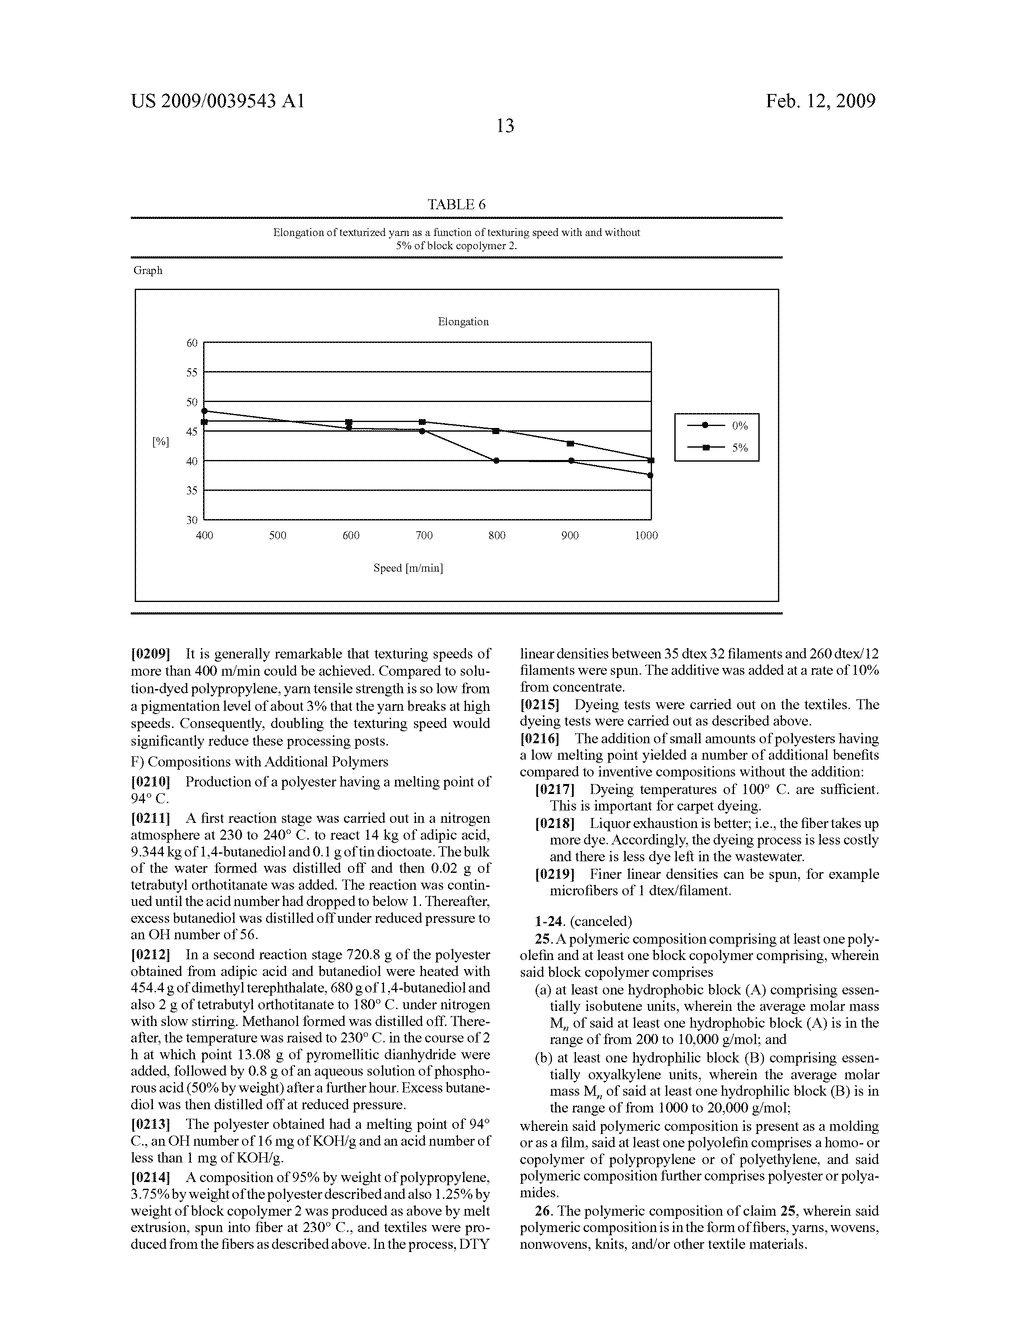 Polymer Composition Comprising Polyolefins And Amphiphilic Block Copolymers And Optionally Other Polymers And/Or Fillers And Method For Dying Compositions Of That Type Or Printing Thereon - diagram, schematic, and image 14